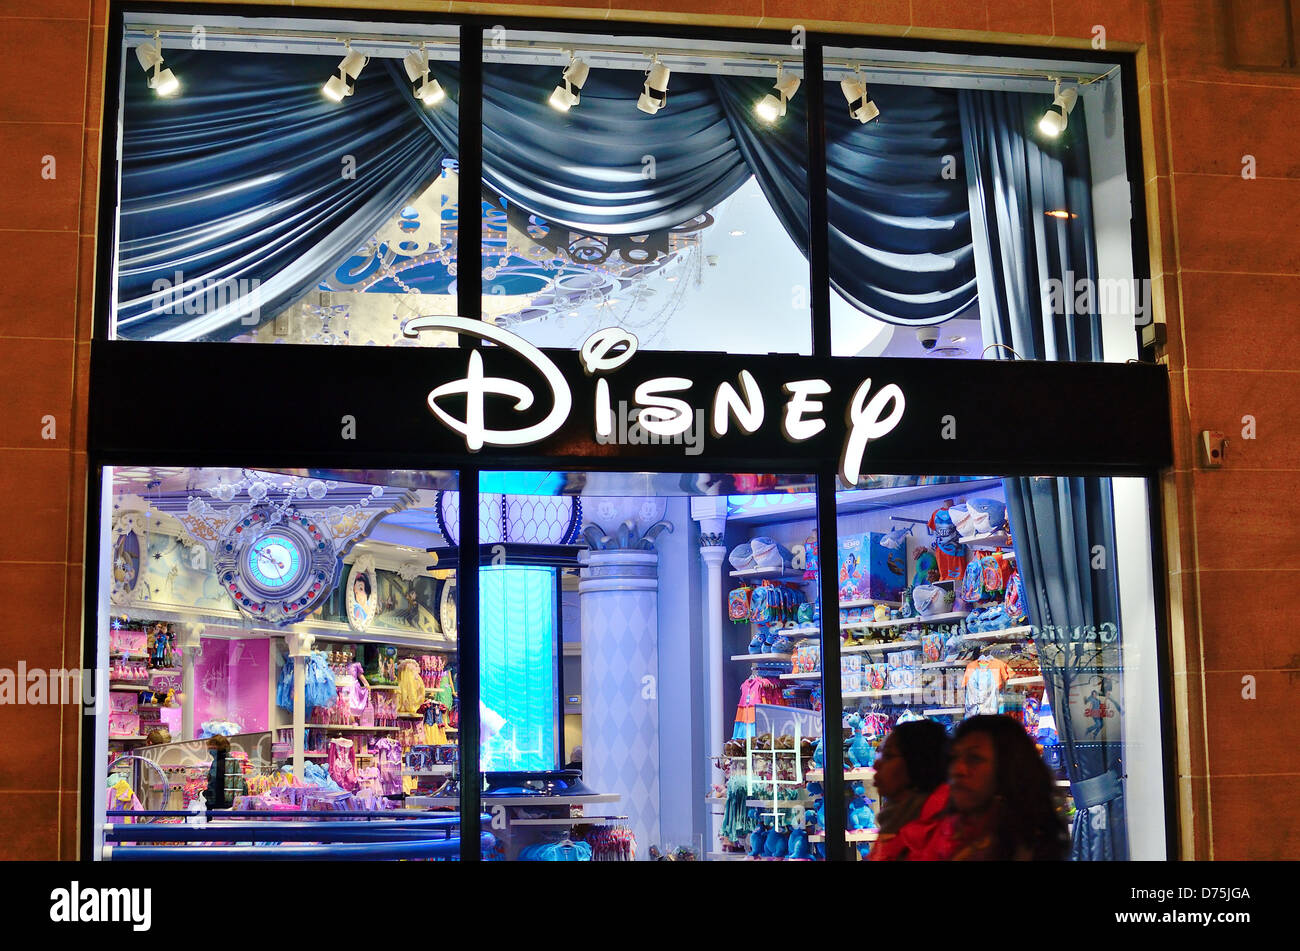 Disney shop on the Champs Elysees at night Paris Stock Photo